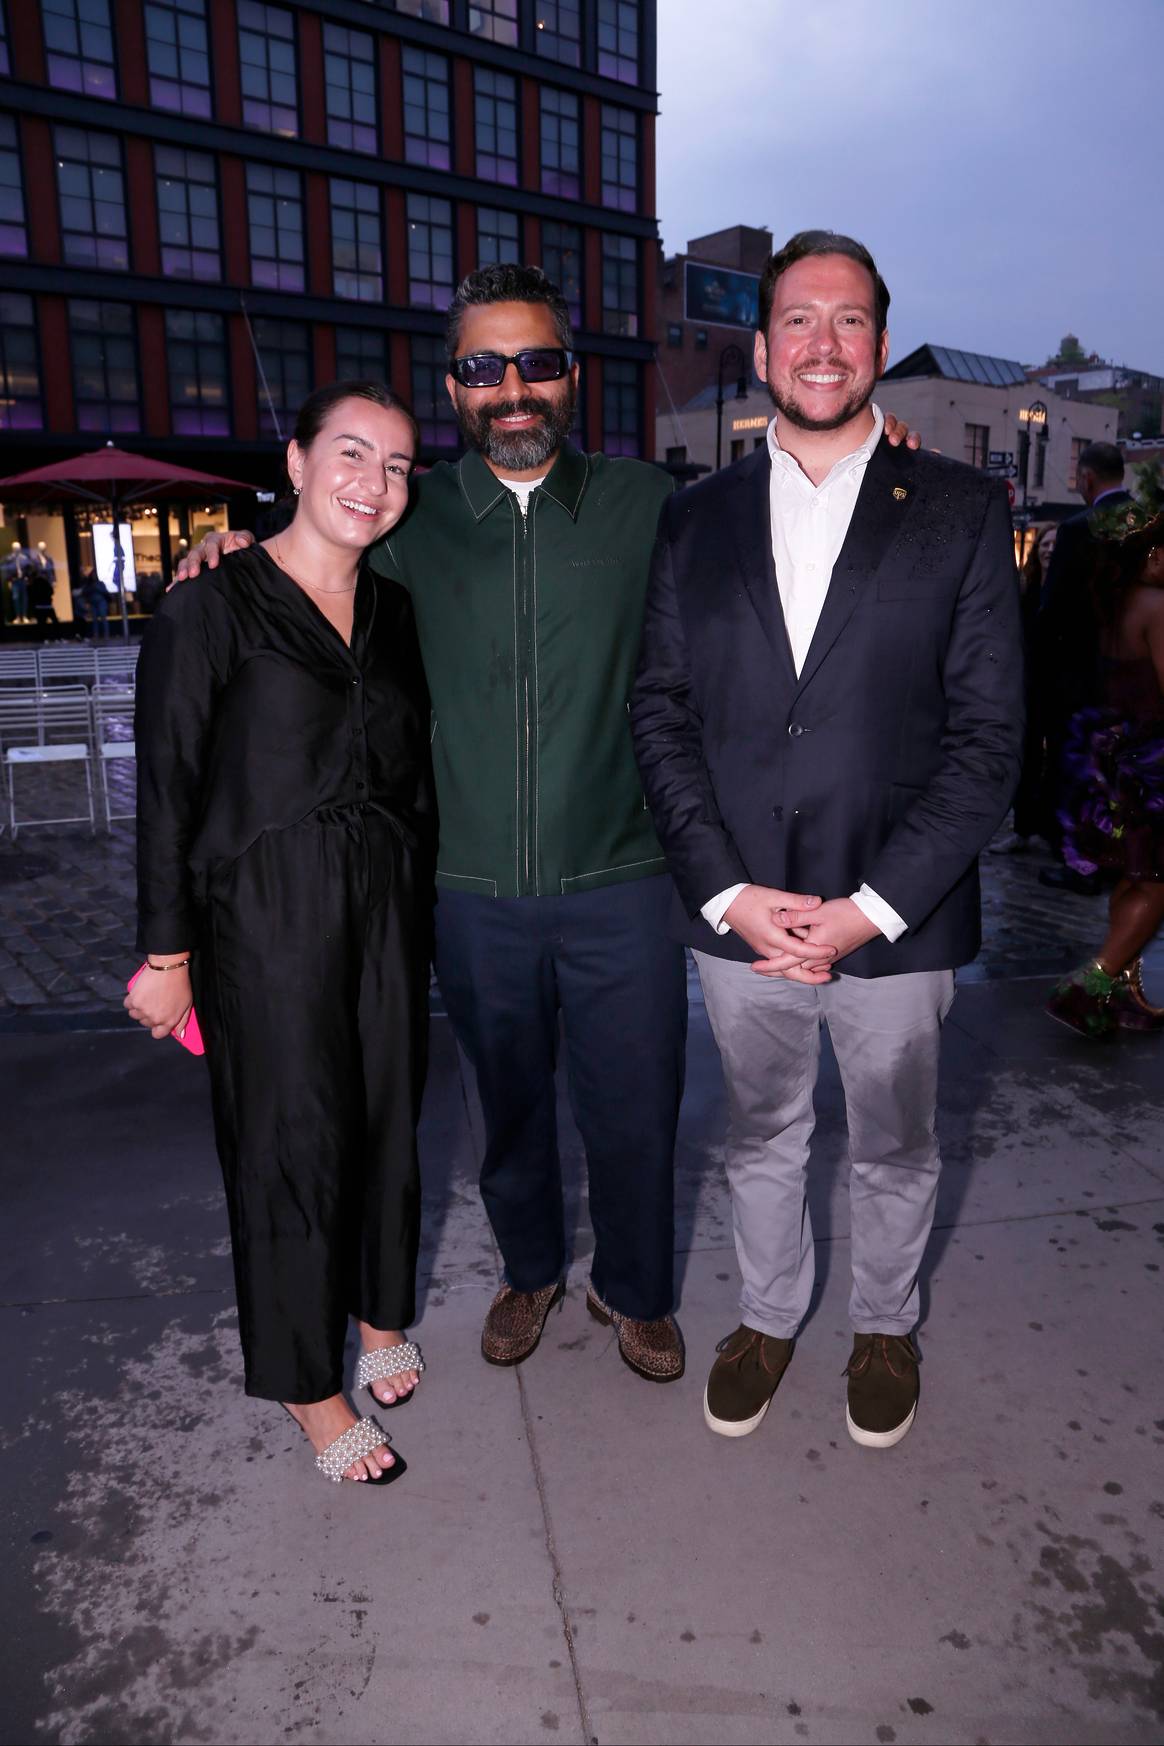 Honoree Angelo Baque (middle) with Sarah Shatan from UPS and Mitch Polikoff from UPS. Photo by Thomas Iannaccone, via HSFI.